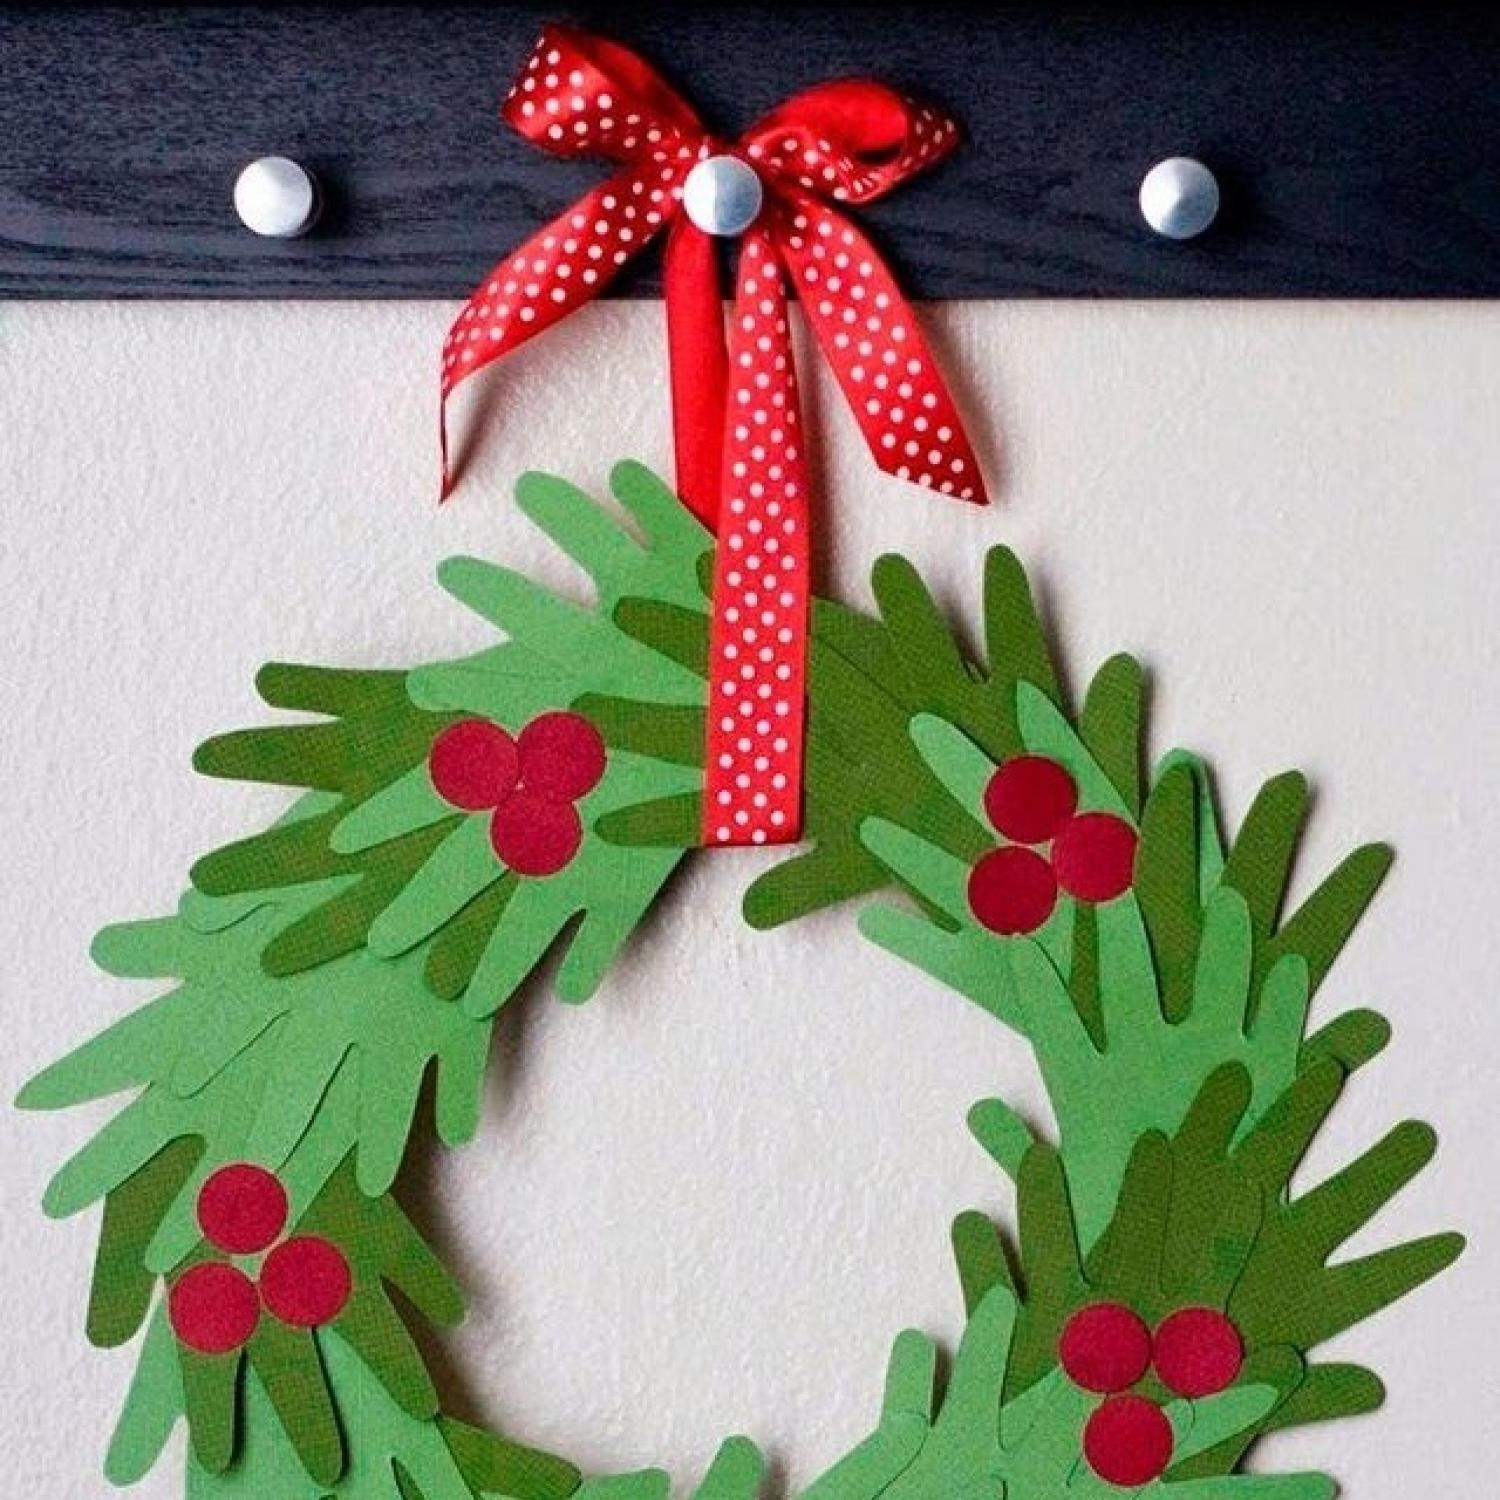 Christmas Craft Ideas For Kids
 10 Handprint Christmas Crafts for Kids